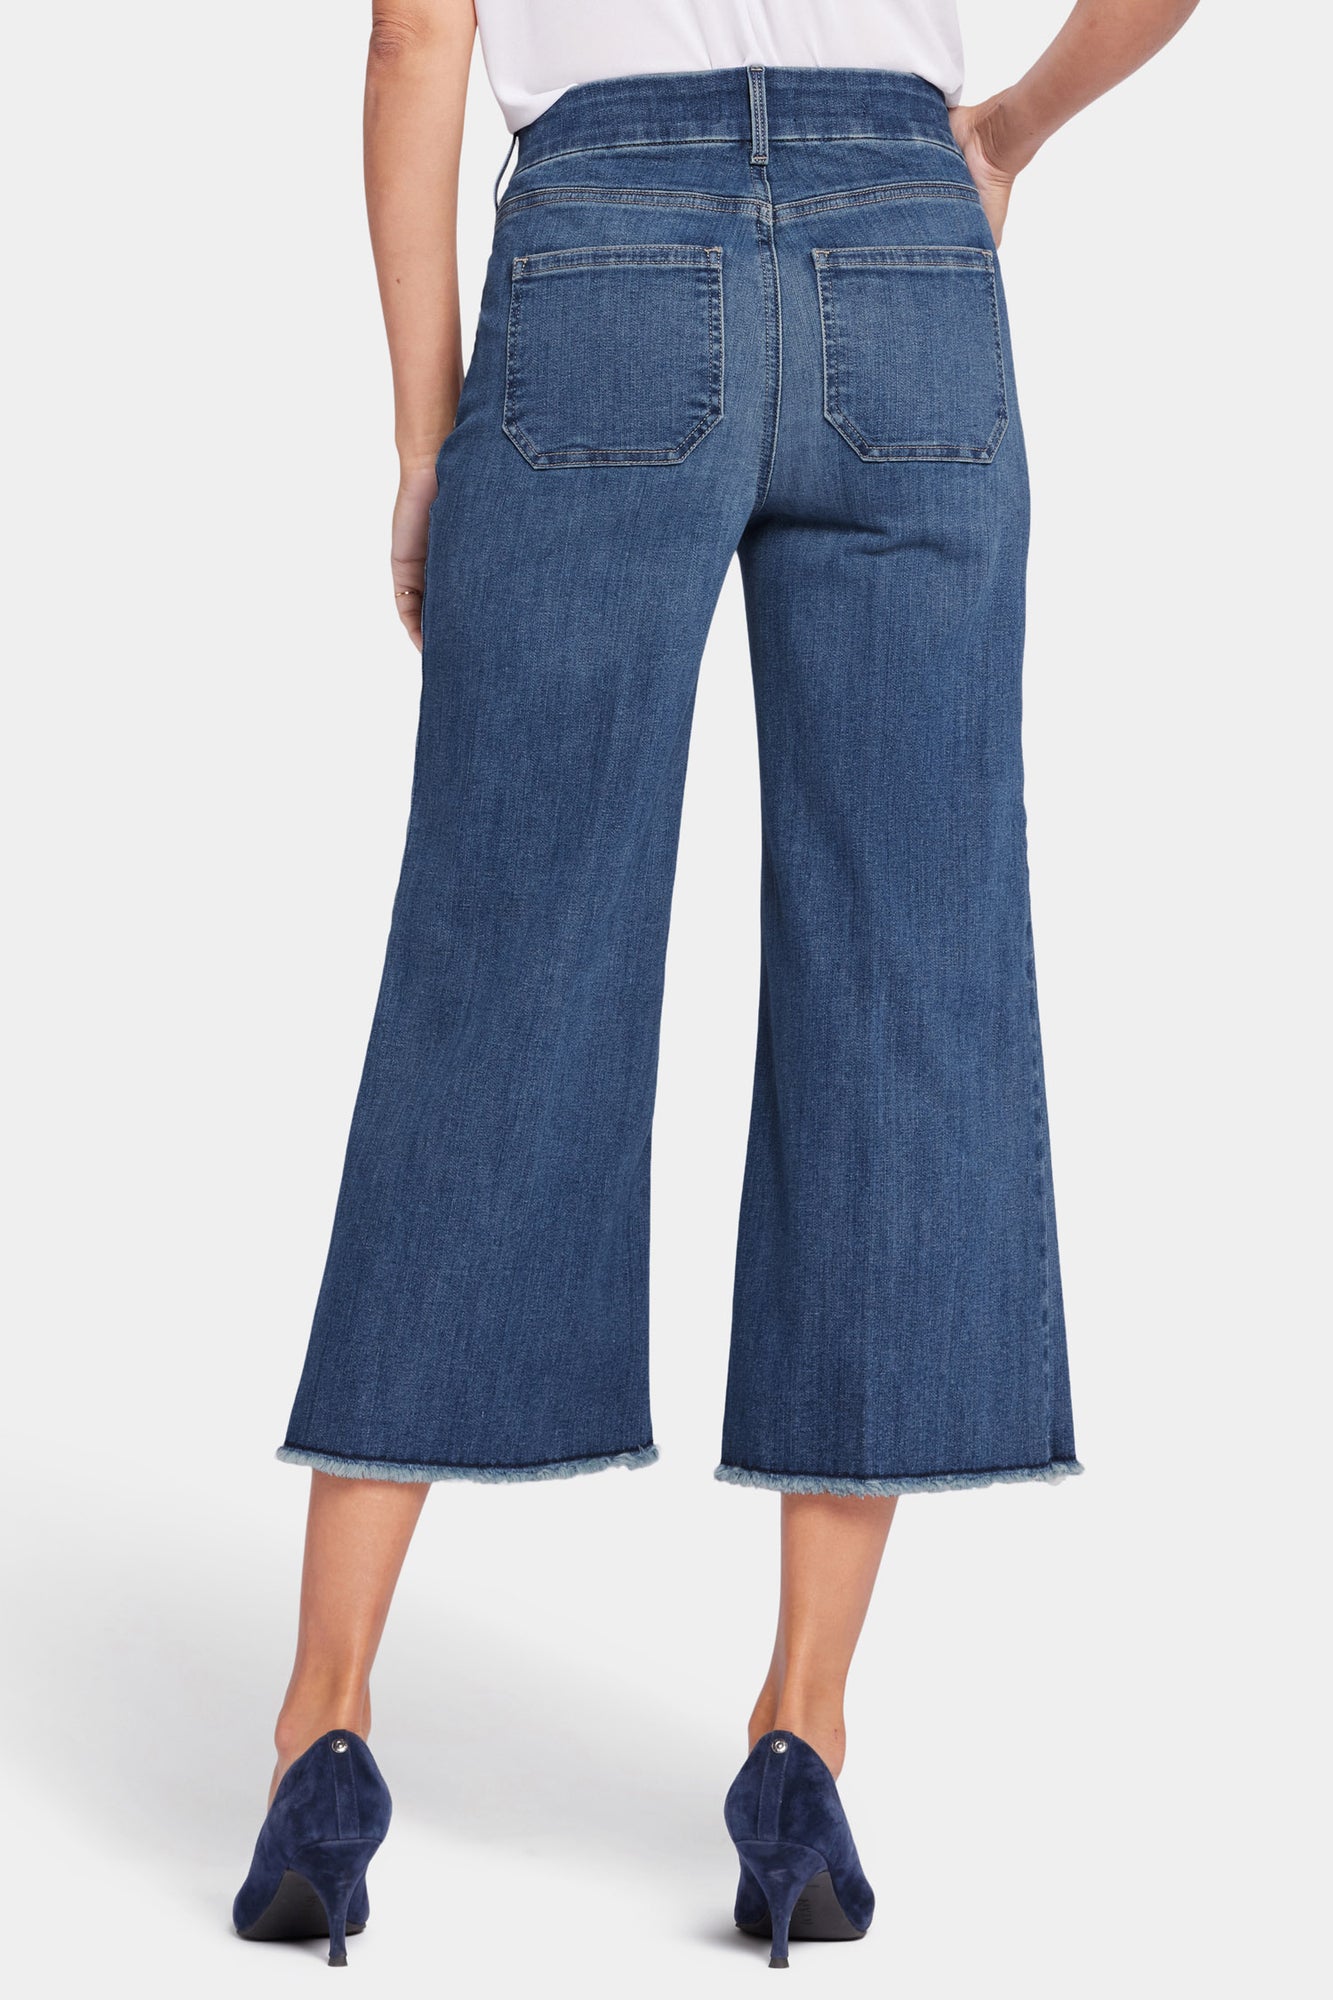 NYDJ Patchie Wide Leg Capri Jeans With Frayed Hems - Fanciful